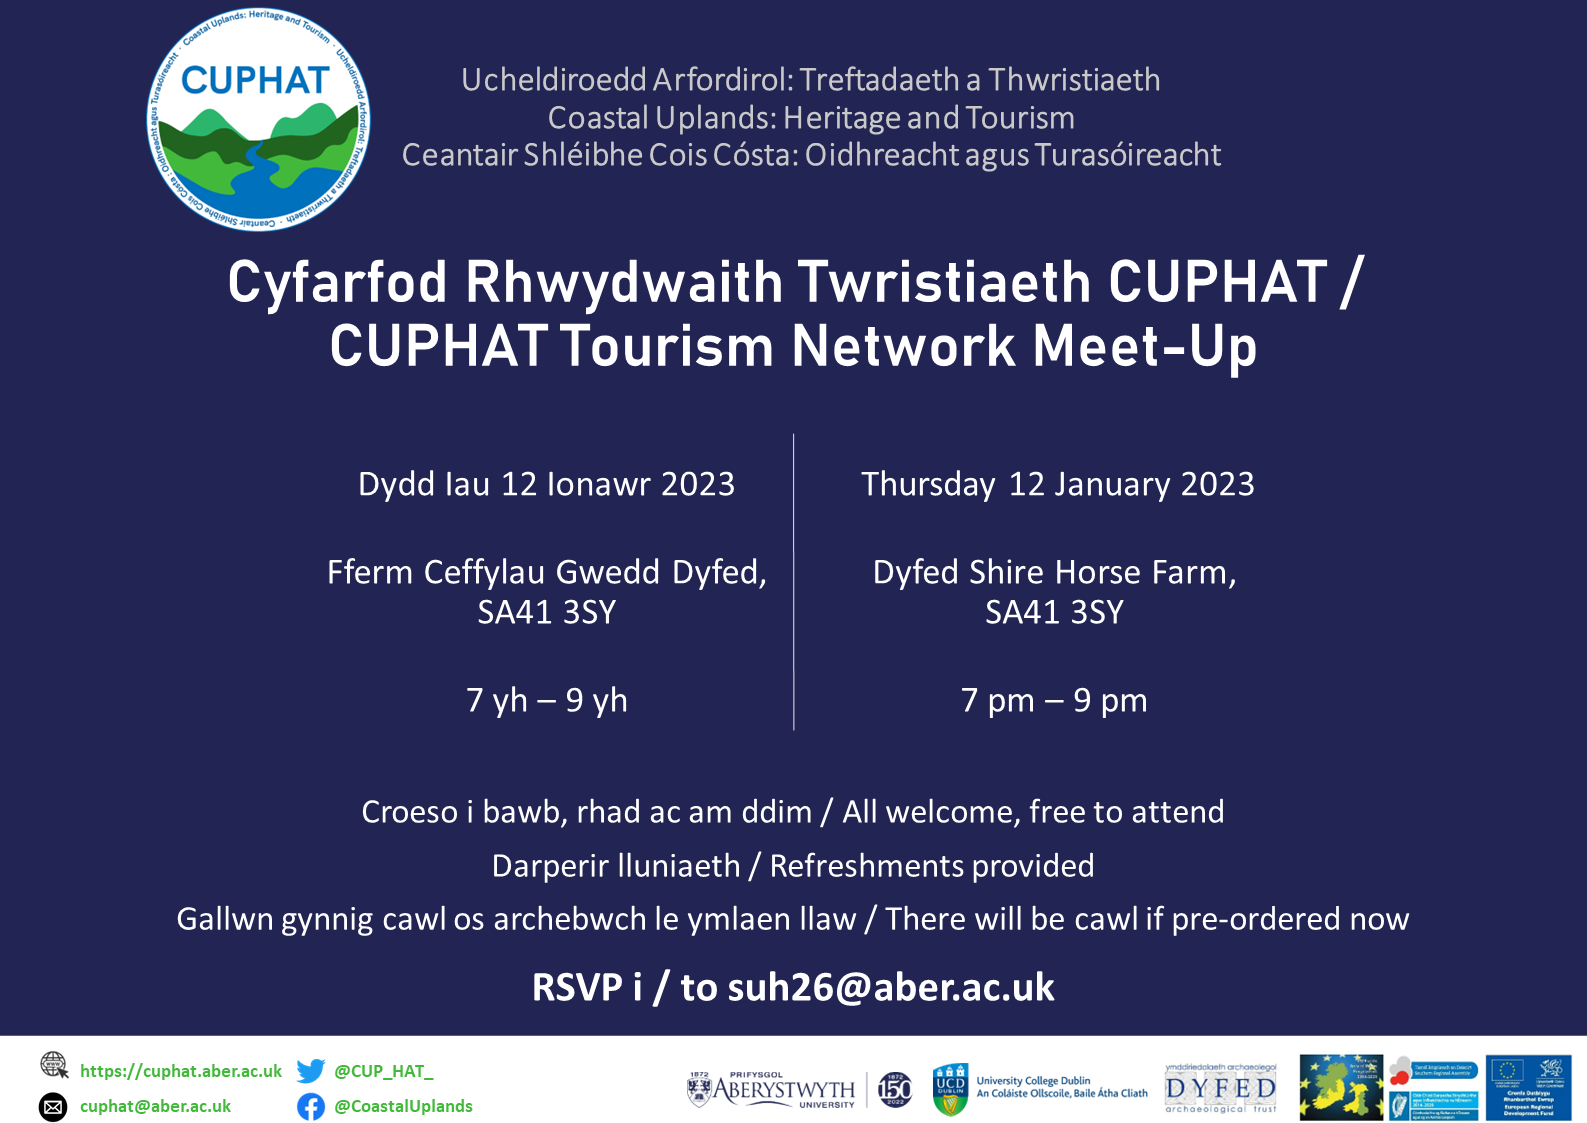 Tourism Network poster for meeting in Wales in January